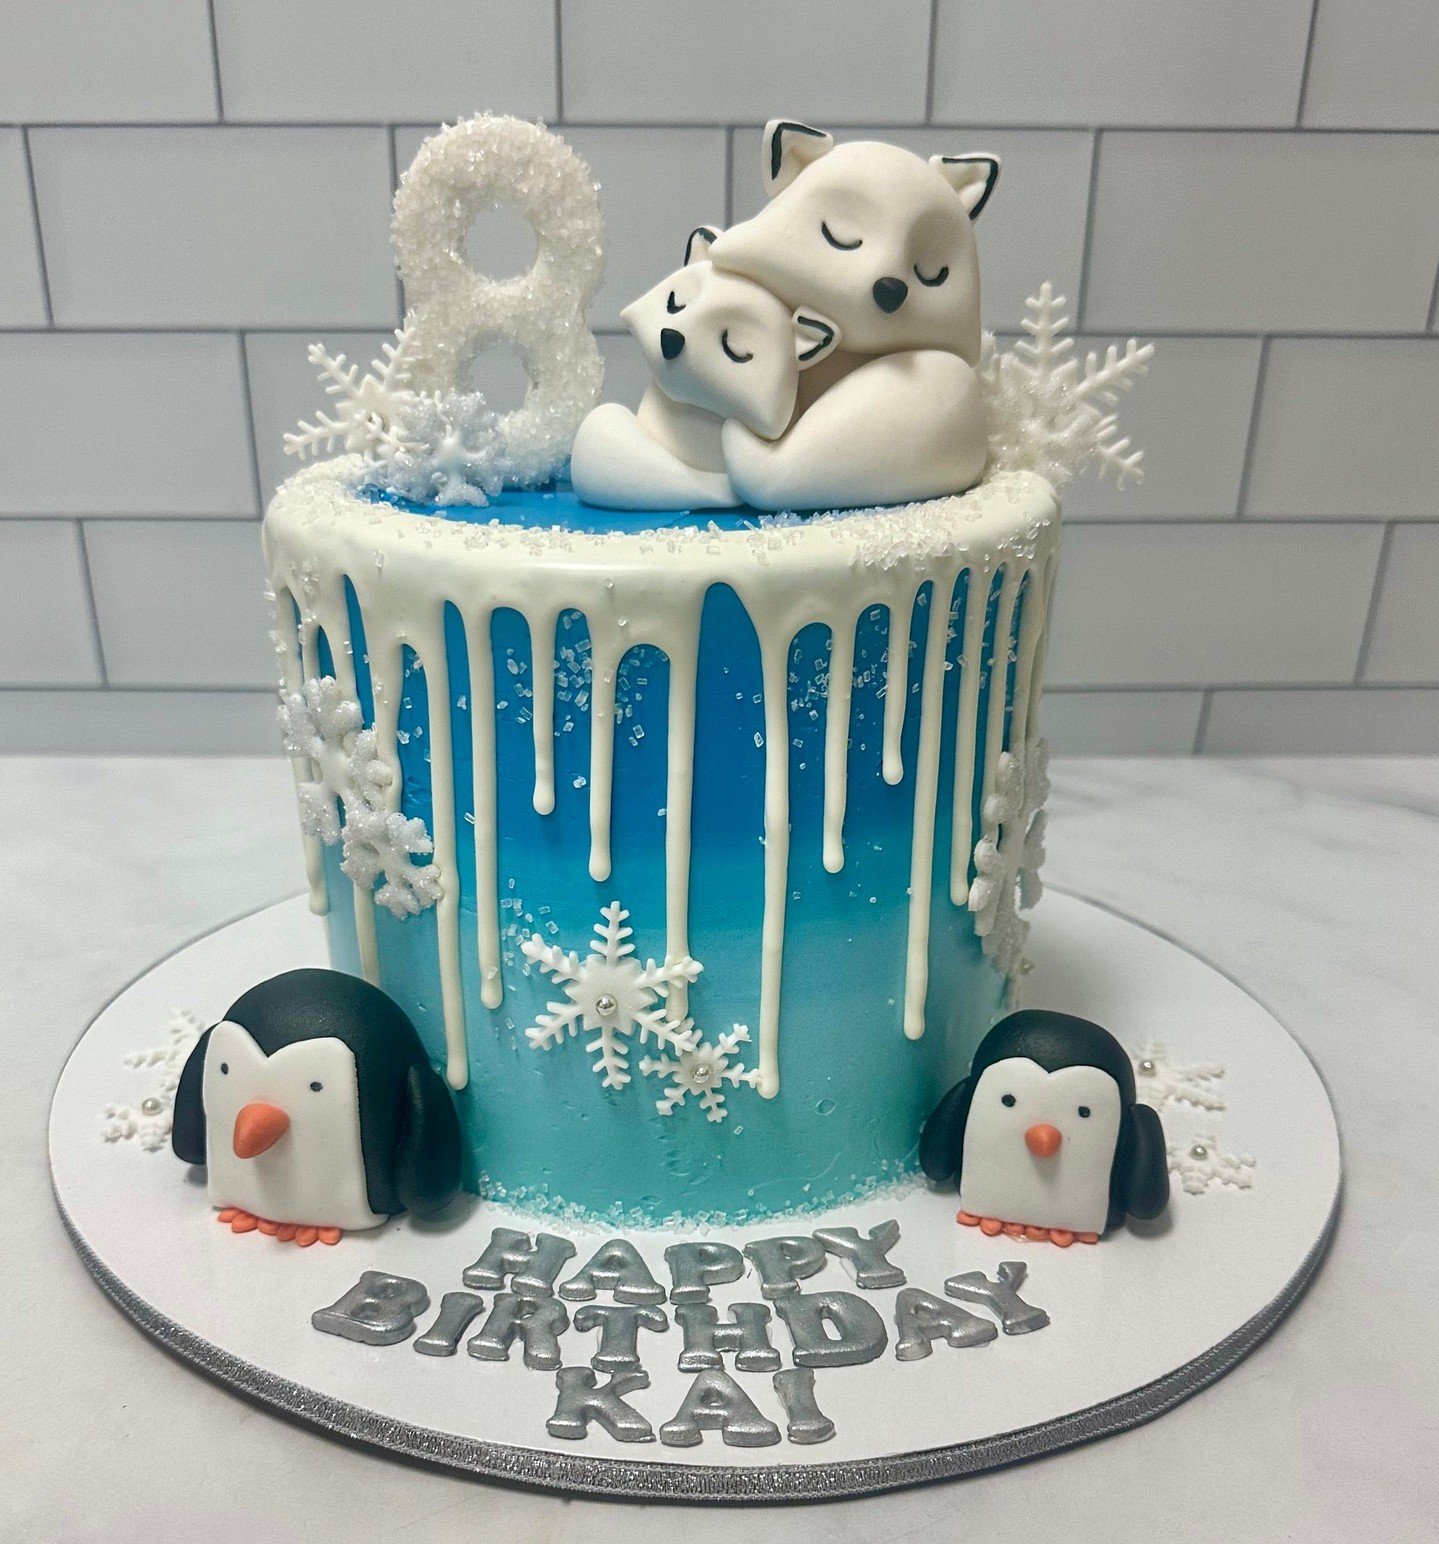 Welcome little one! Grab a slice and chilllll 🐧❄️

#arcticadventure #kupcakekitchen #wantcake #1stbirthdaycake #1stbirthdaycakes #1stbirthdayparty #1stbirthdaycakesmash #1stbirthdaycelebration #firstbirthdayparty #firstbirthdaycake #firstbirthdaycak